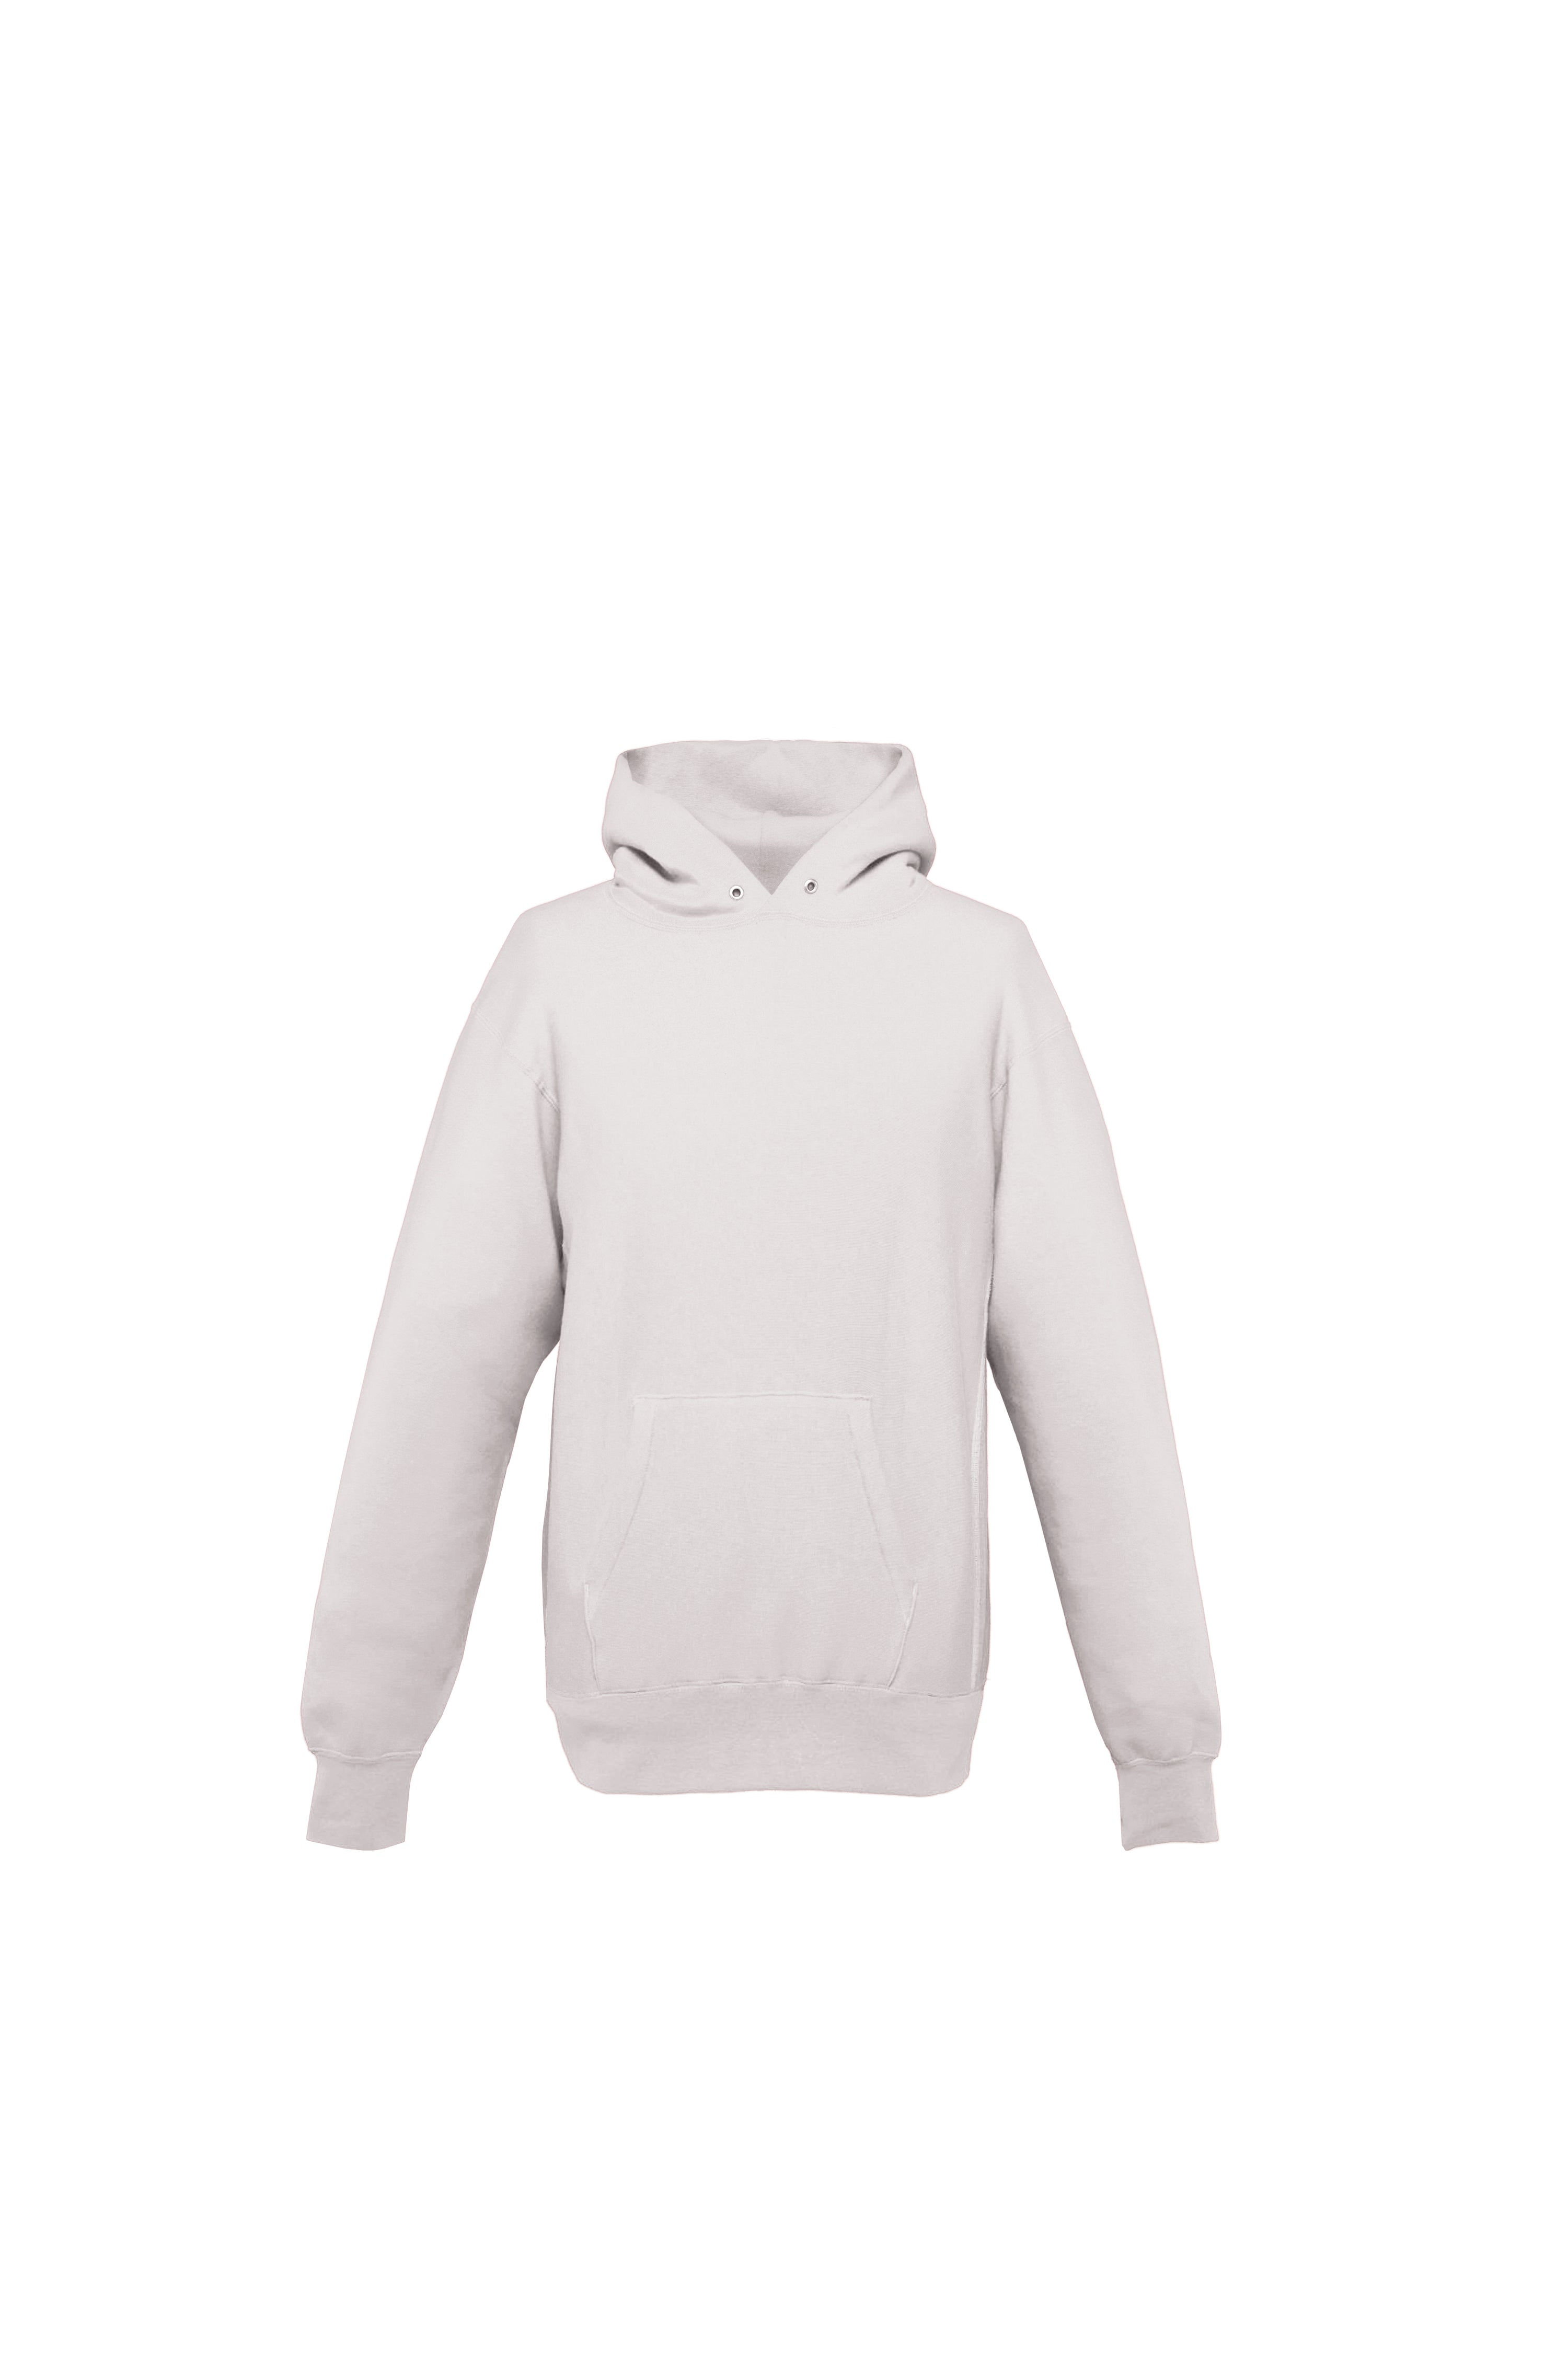 The first Hoodie